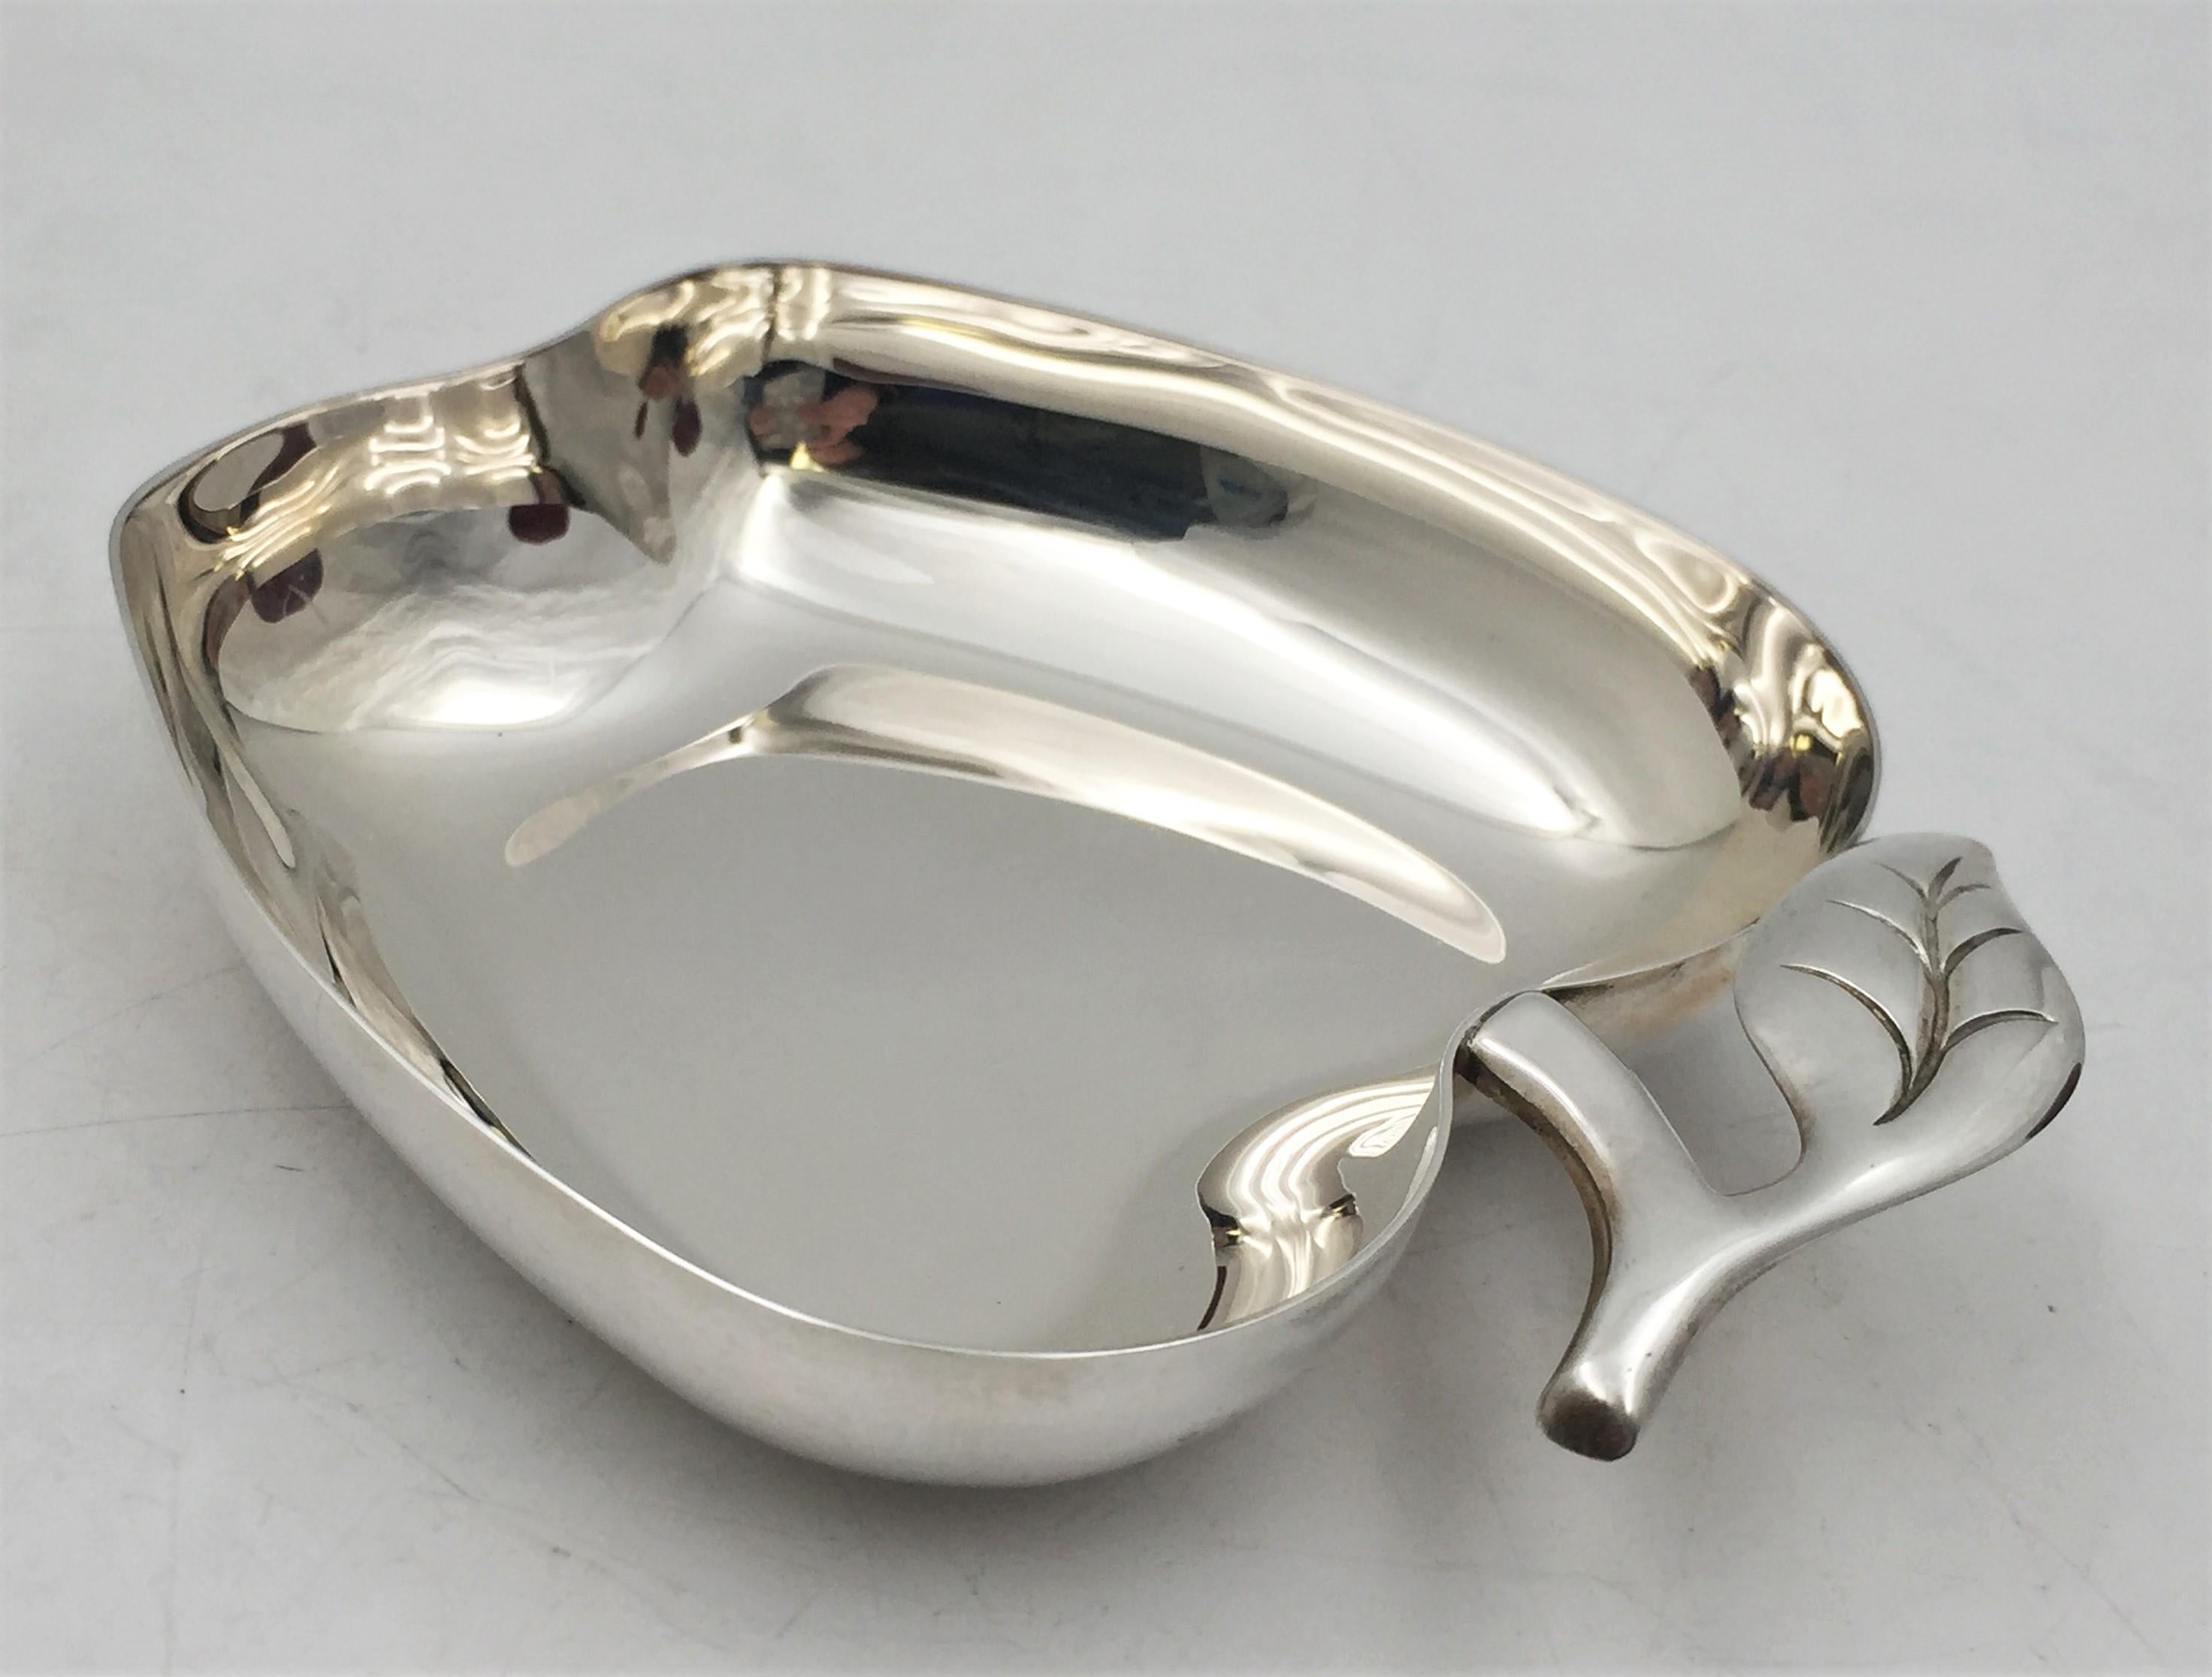 American Tiffany & Co. Sterling Silver Honey Dish in Mid-Century Modern Style